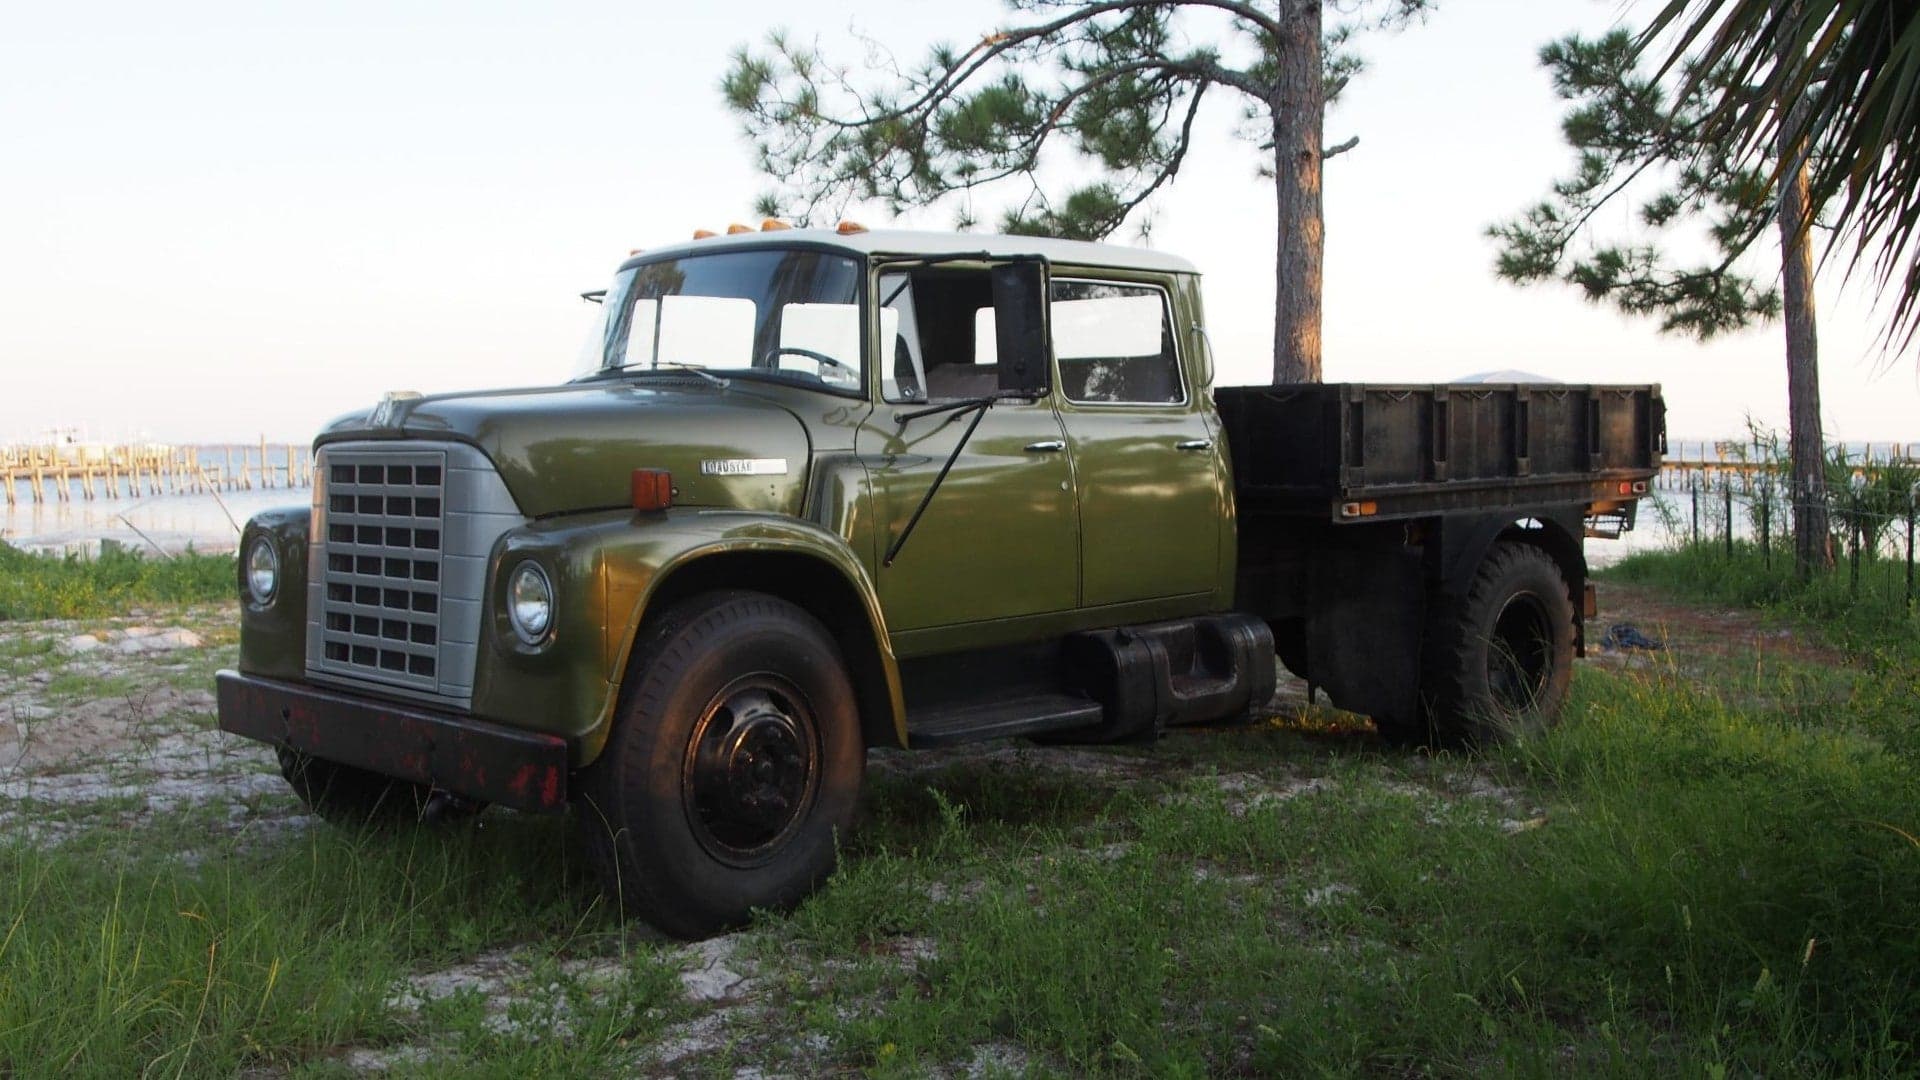 You Too Can Live the Big Rig Life With This Four-Door 1978 International Truck